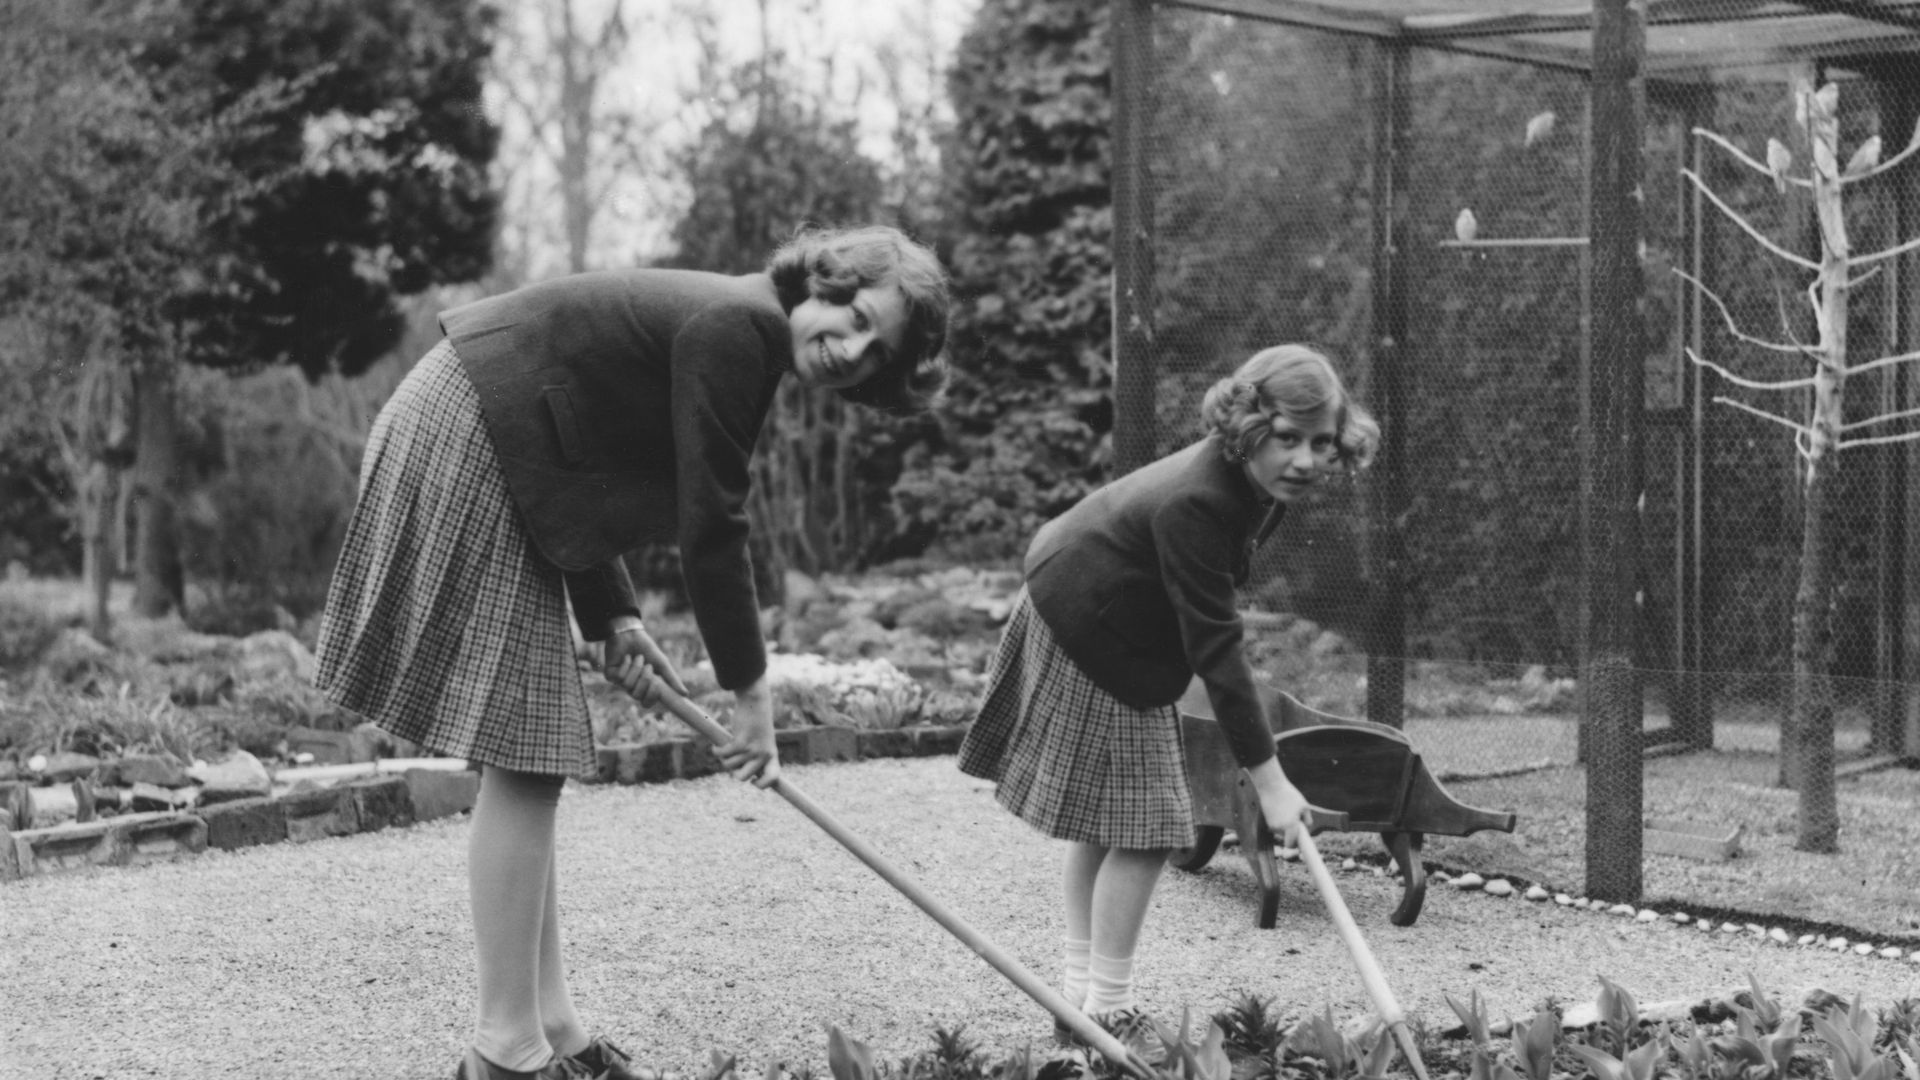 The Queen and Princess Margsret gardening